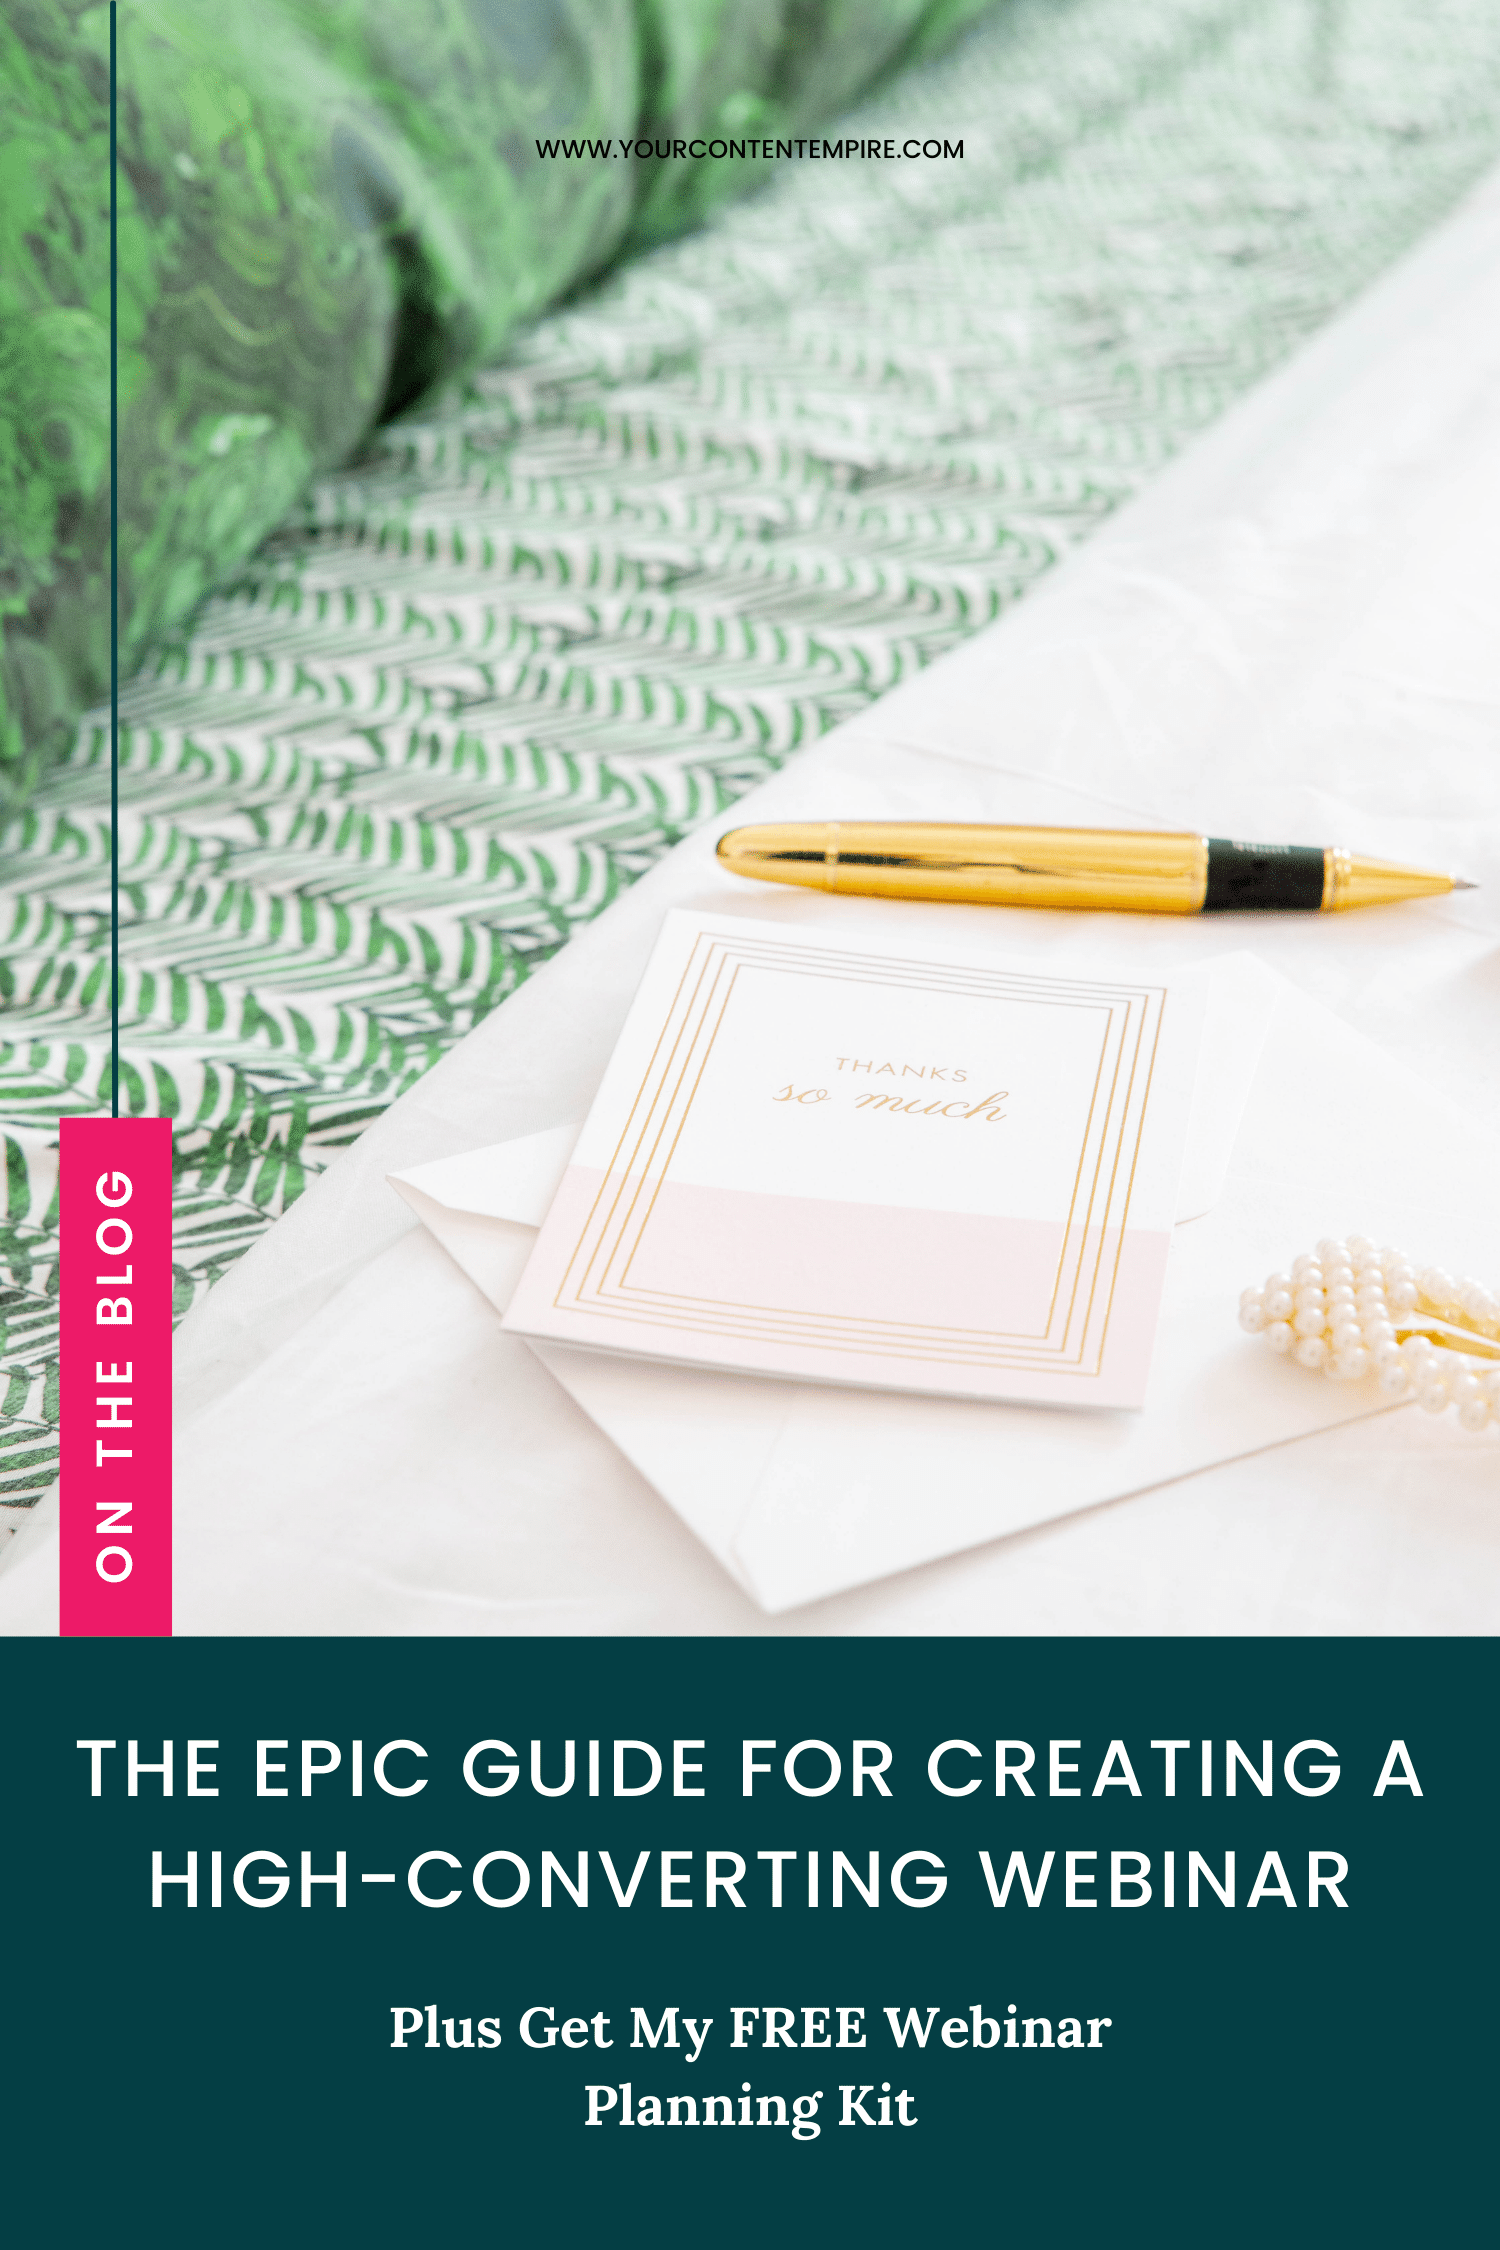 The Epic Guide for Creating a High-Converting Webinar